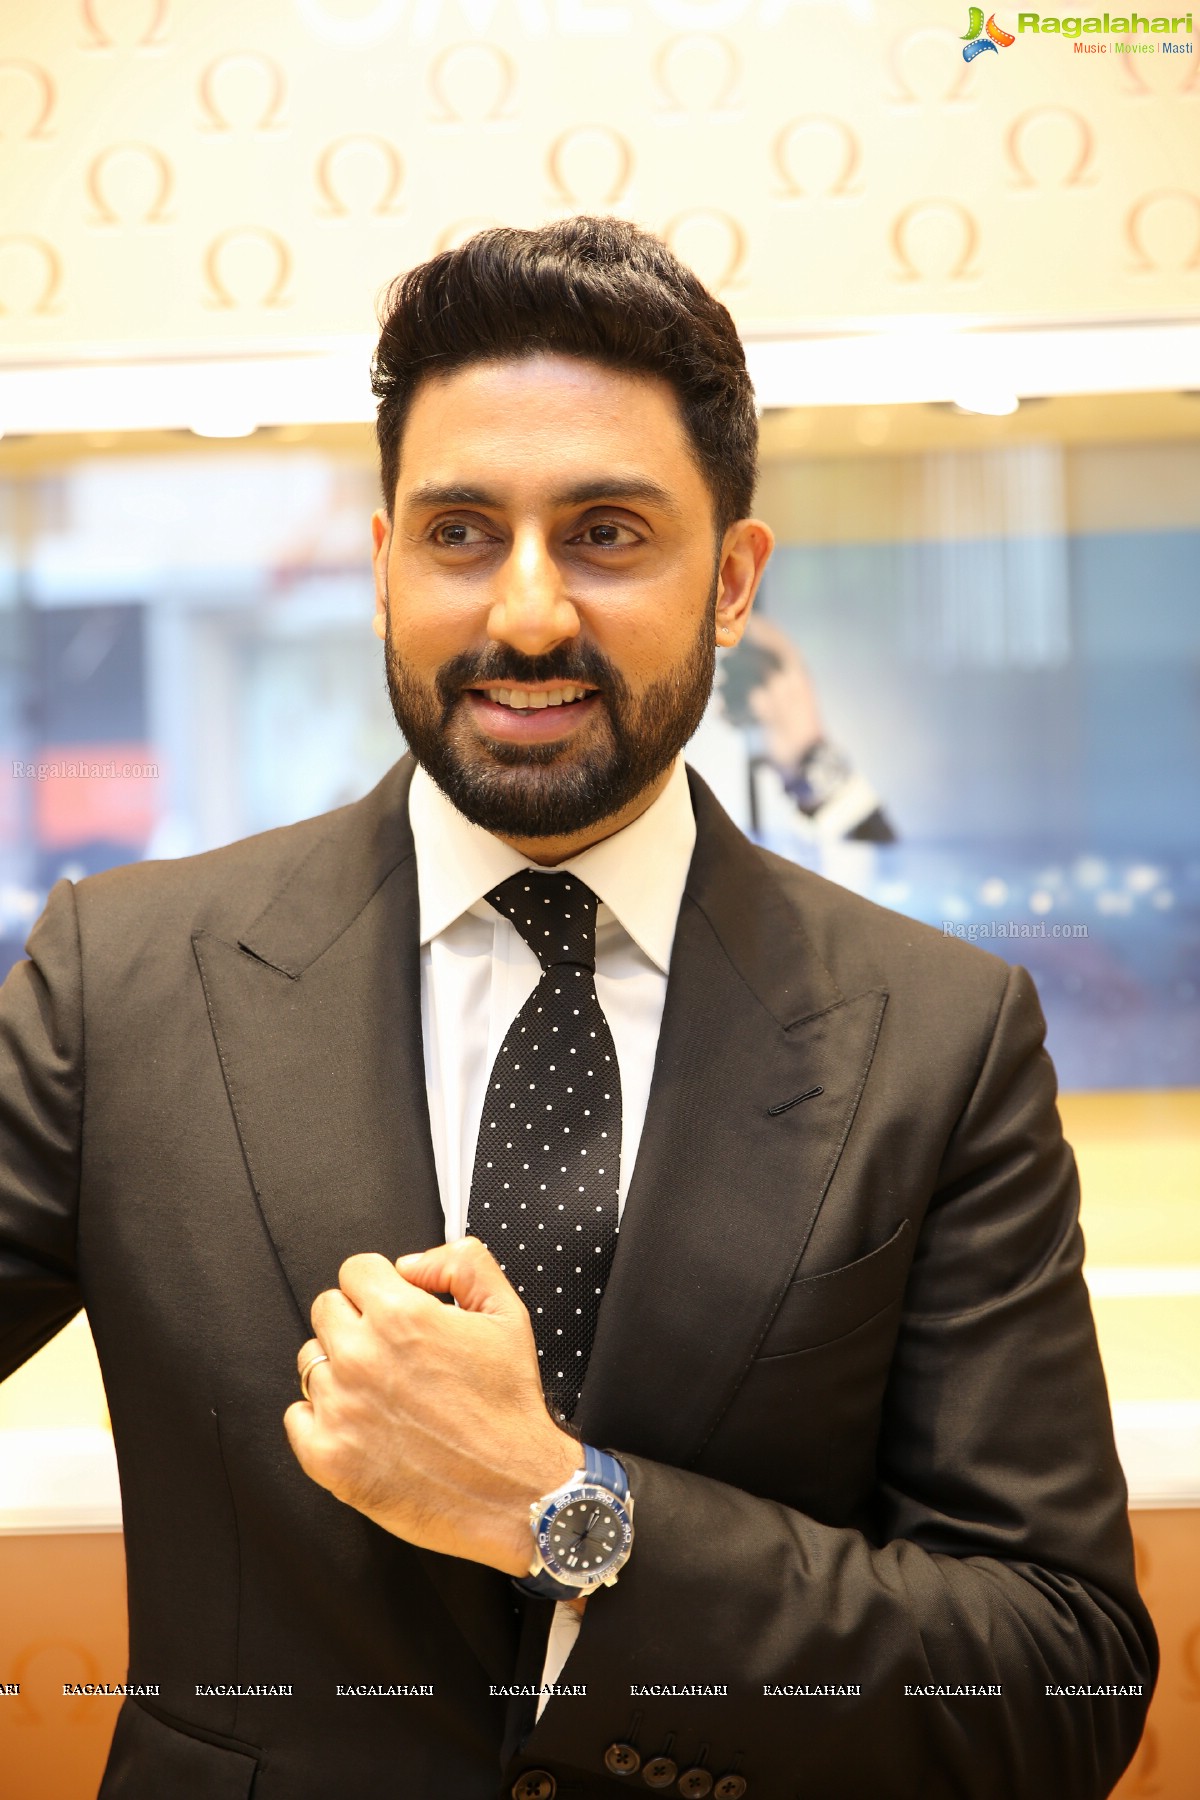 Abhishek Bachchan launches OMEGA Boutique & Seamaster Diver 300M Watch at Omega Boutique, Jubilee Hills, Hyderabad